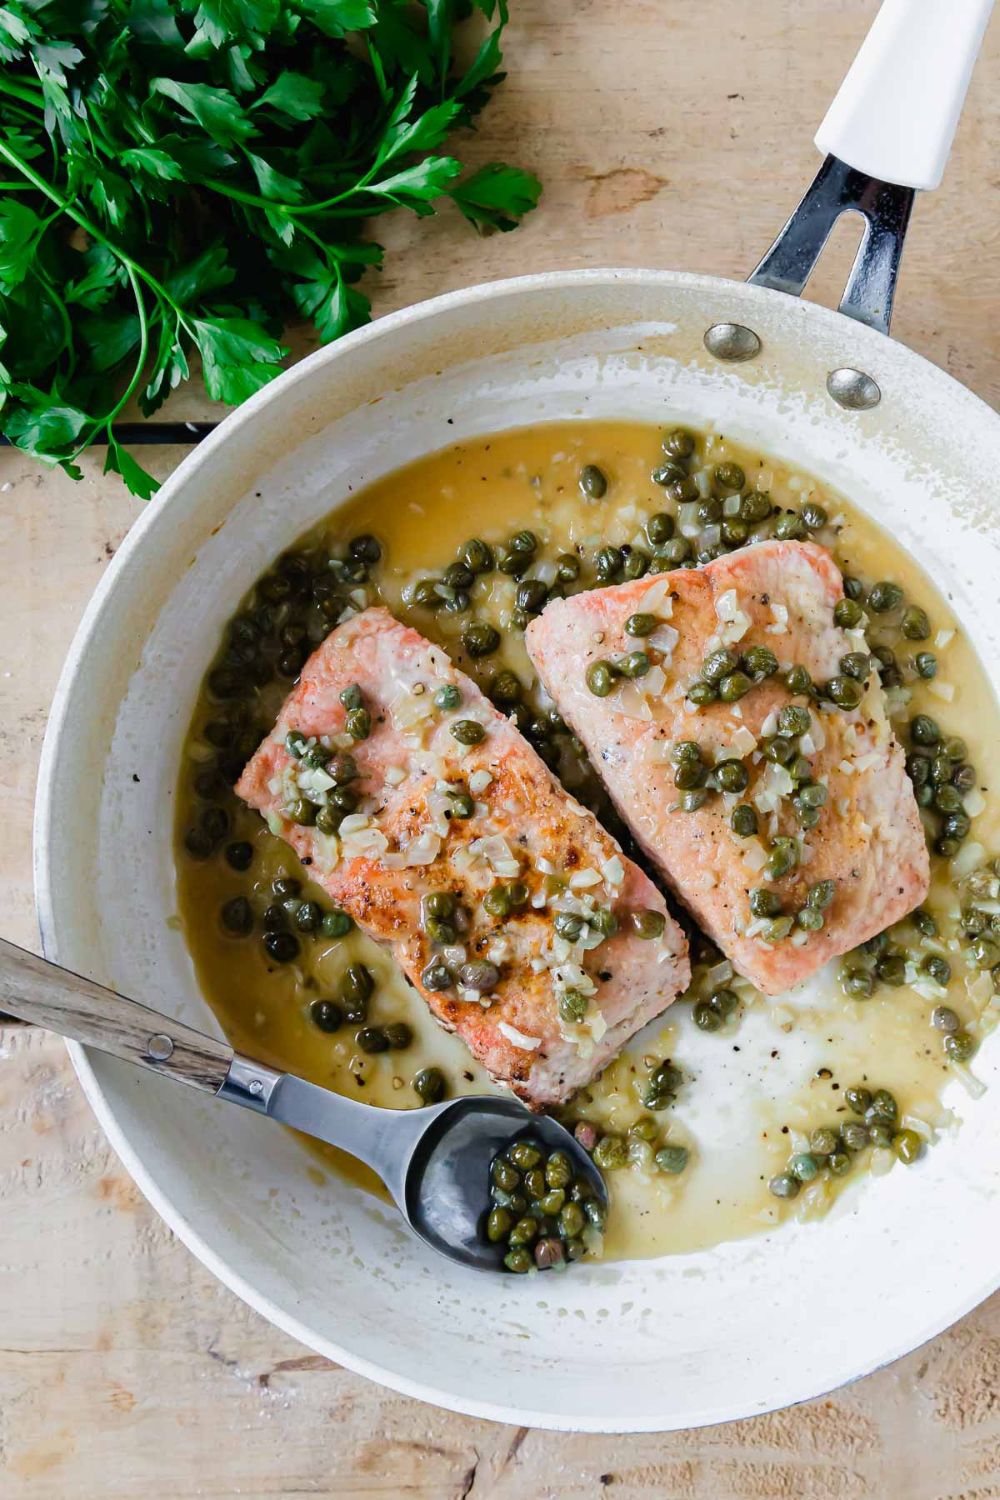 add the salmon back to the skillet.